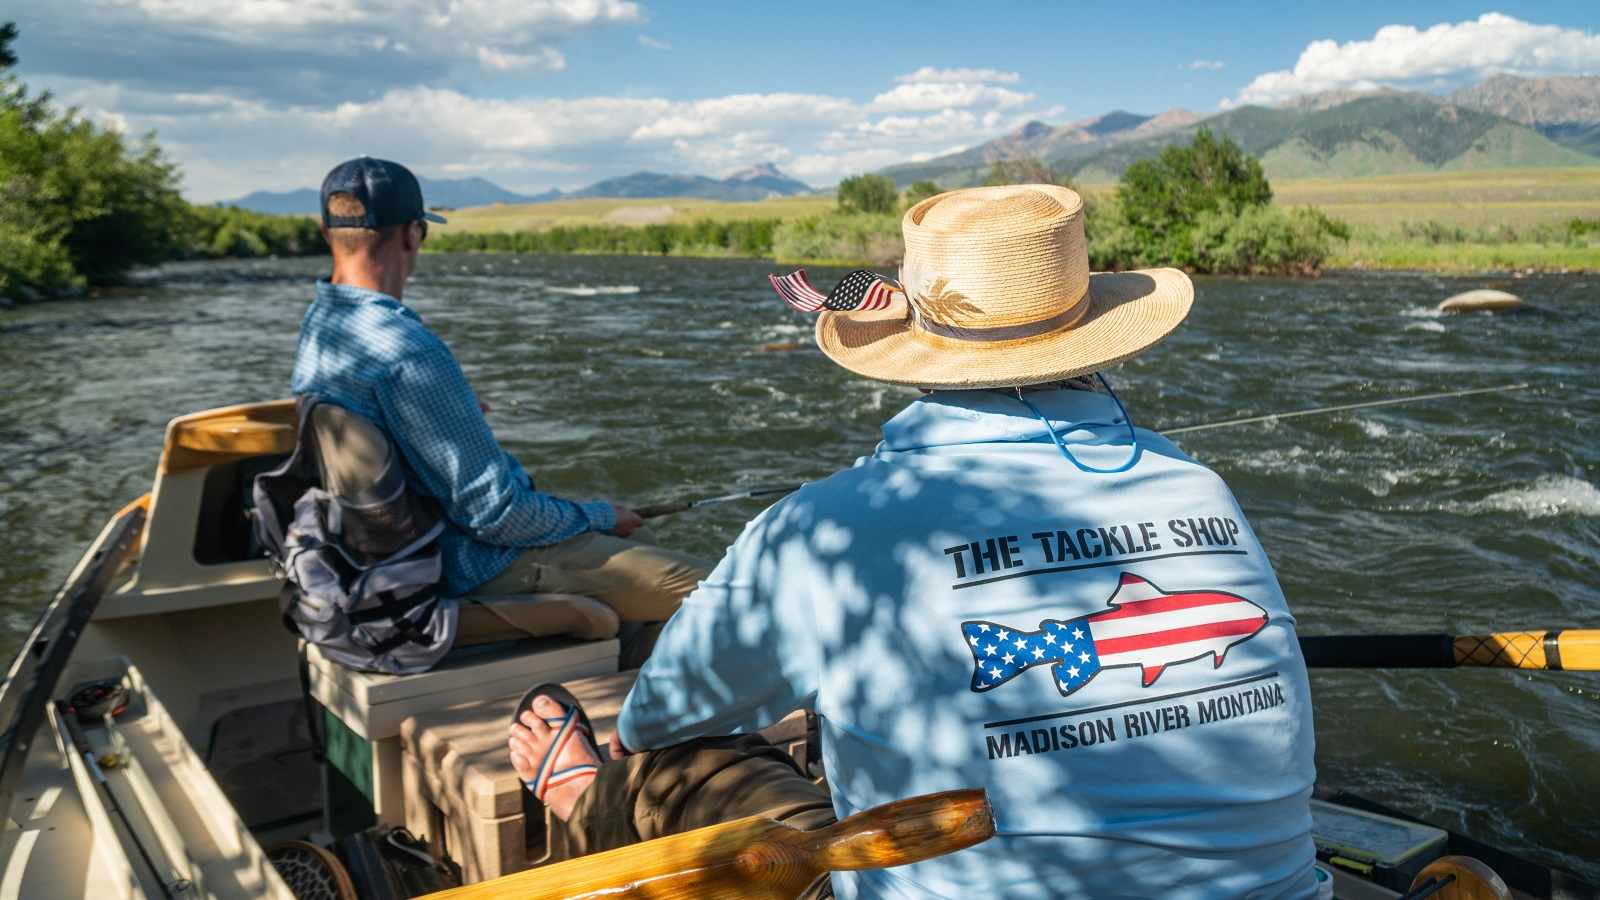 A man sits on a boat while fly fishing as a guide wearing a Tackle Shop sweatshirt steers them down a Montana river.